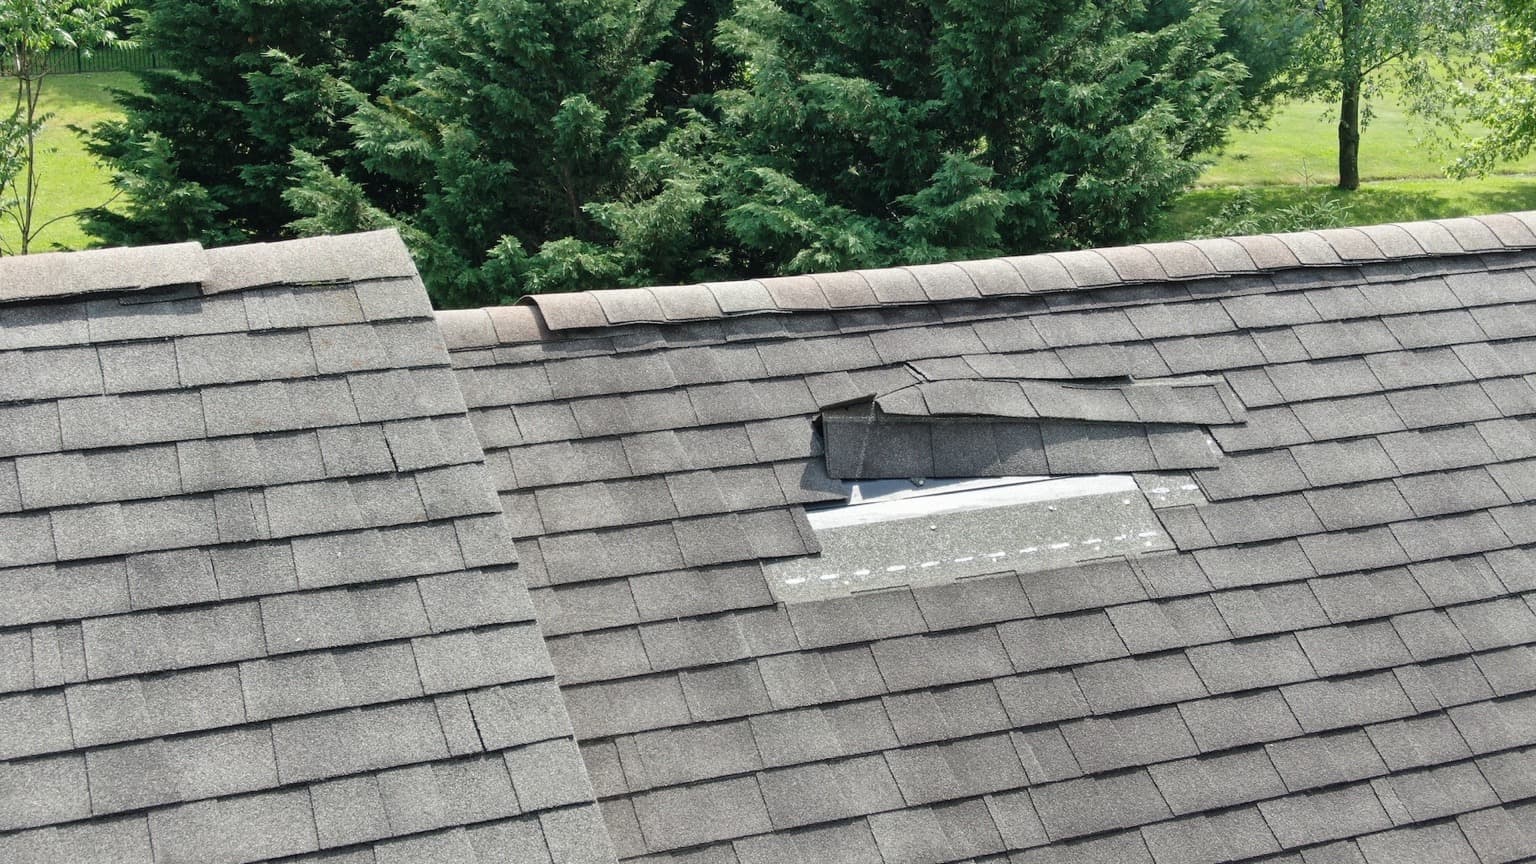 Top Signs Your Roofing System Needs Immediate Attention - Residential Roof Repair in Gwinnett County